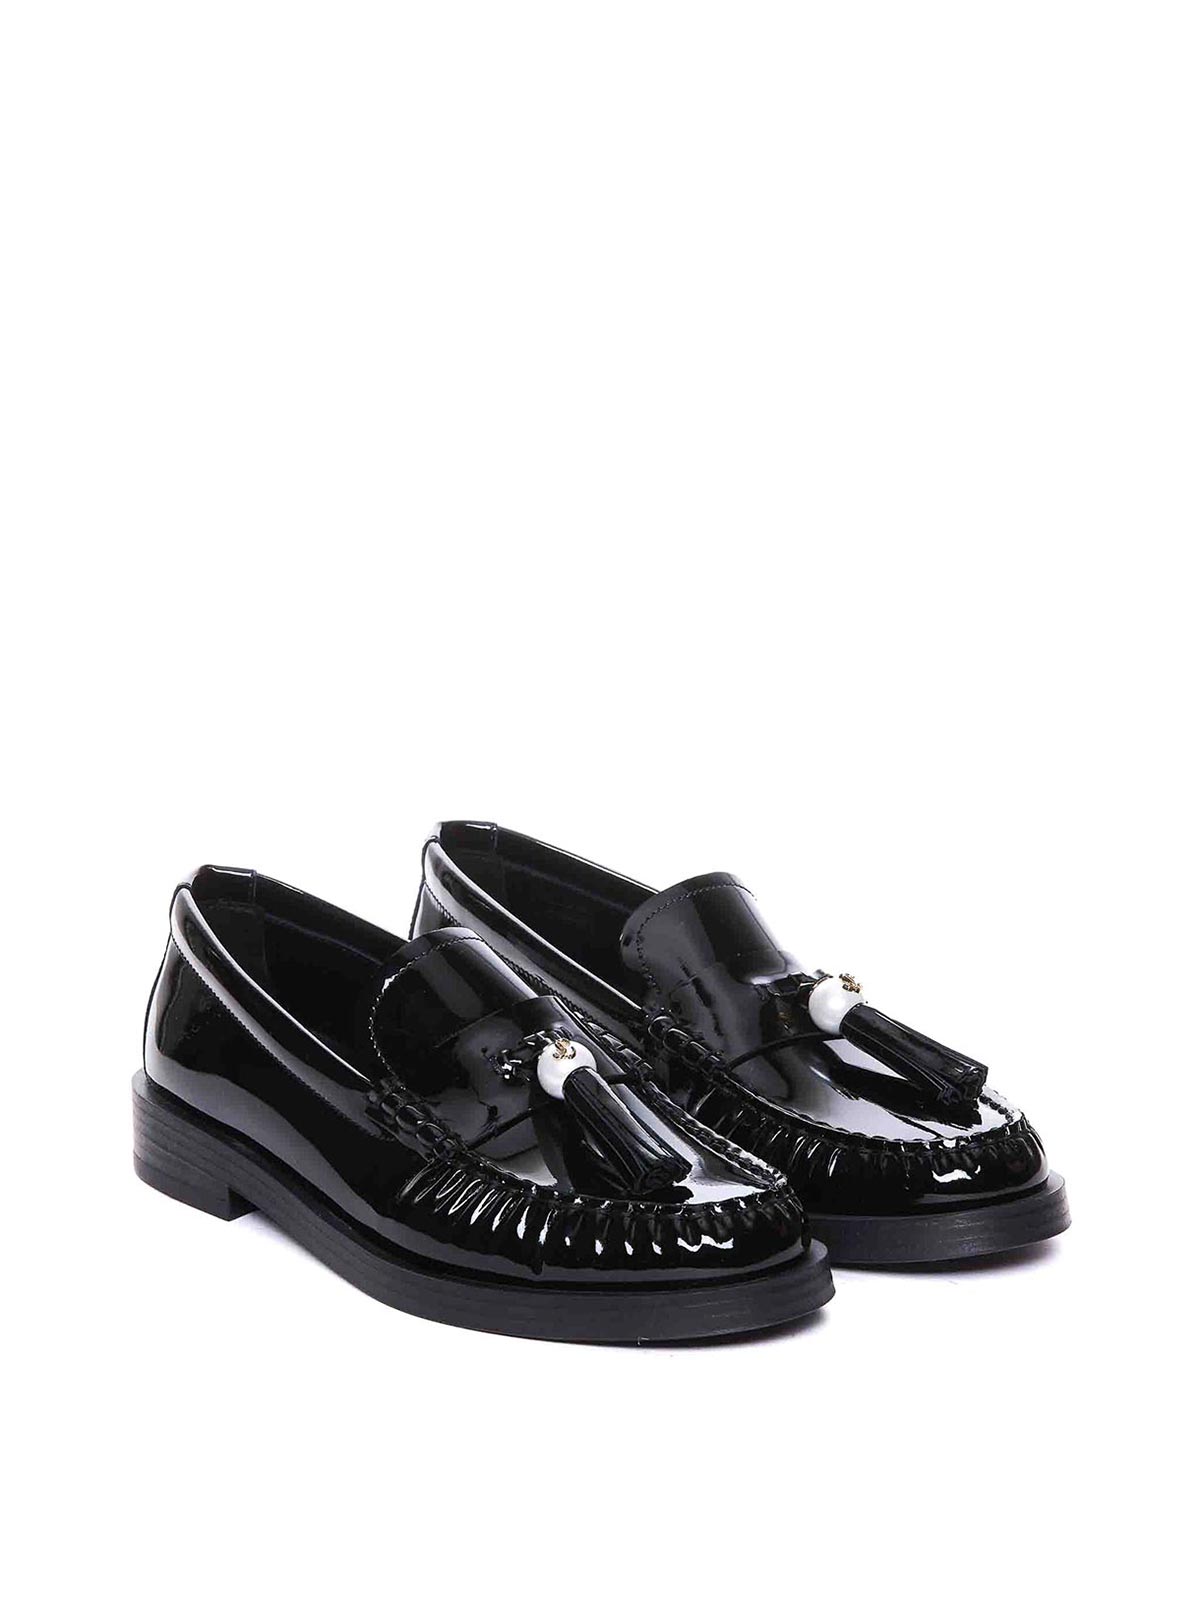 Shop Jimmy Choo Black Addie Loafers And Round